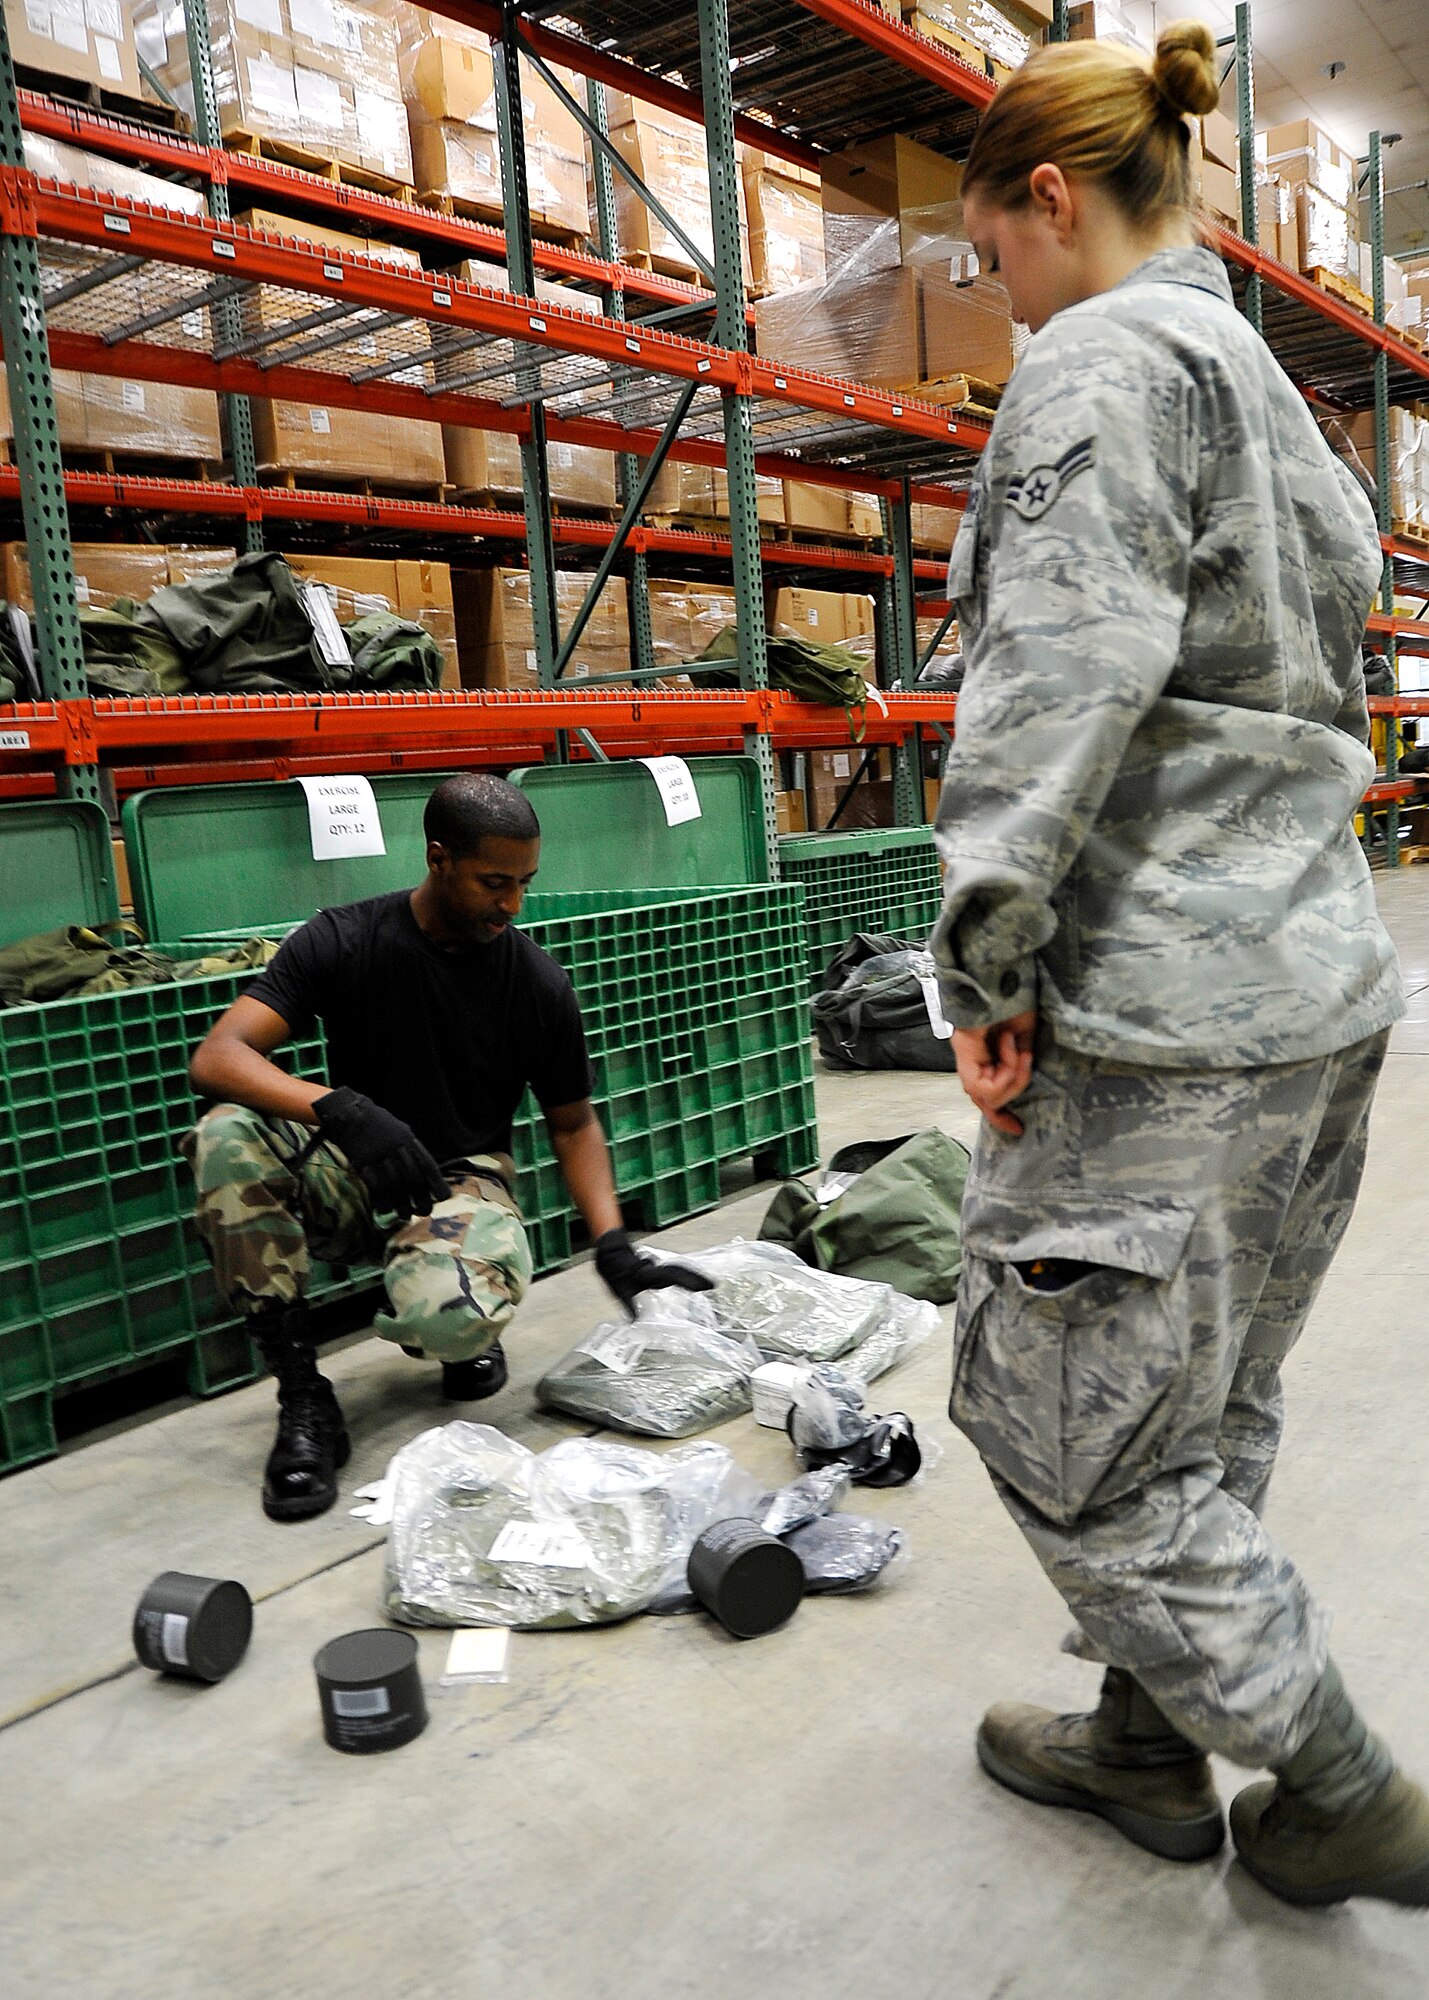 MISAWA AIR BASE, Japan -- Staff Sgt. Jeffrey Rose, 35th Logistics Readiness Squadron individual protection equipment element NCO in charge, inspects a C-1 bag during a base exercise August 18. The IPE element processed approximately 100 C-1 bags during the three-day exercise. (U.S. Air Force photo/Staff Sgt. Chad C. Strohmeyer)